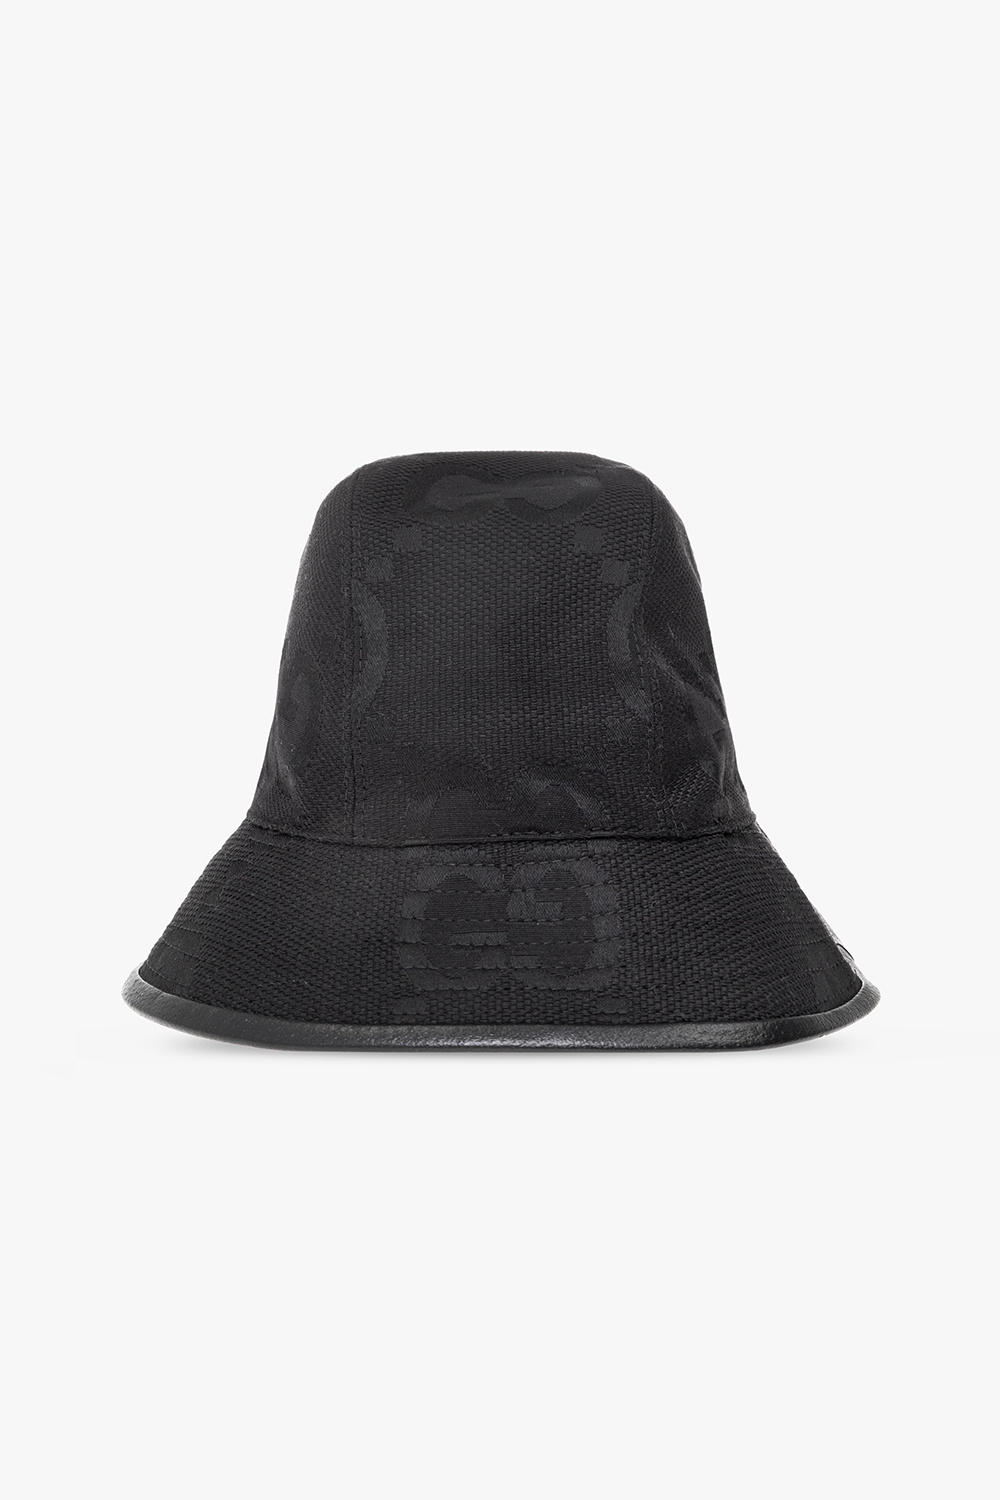 Gucci TPU film toe cap for added protection & durability